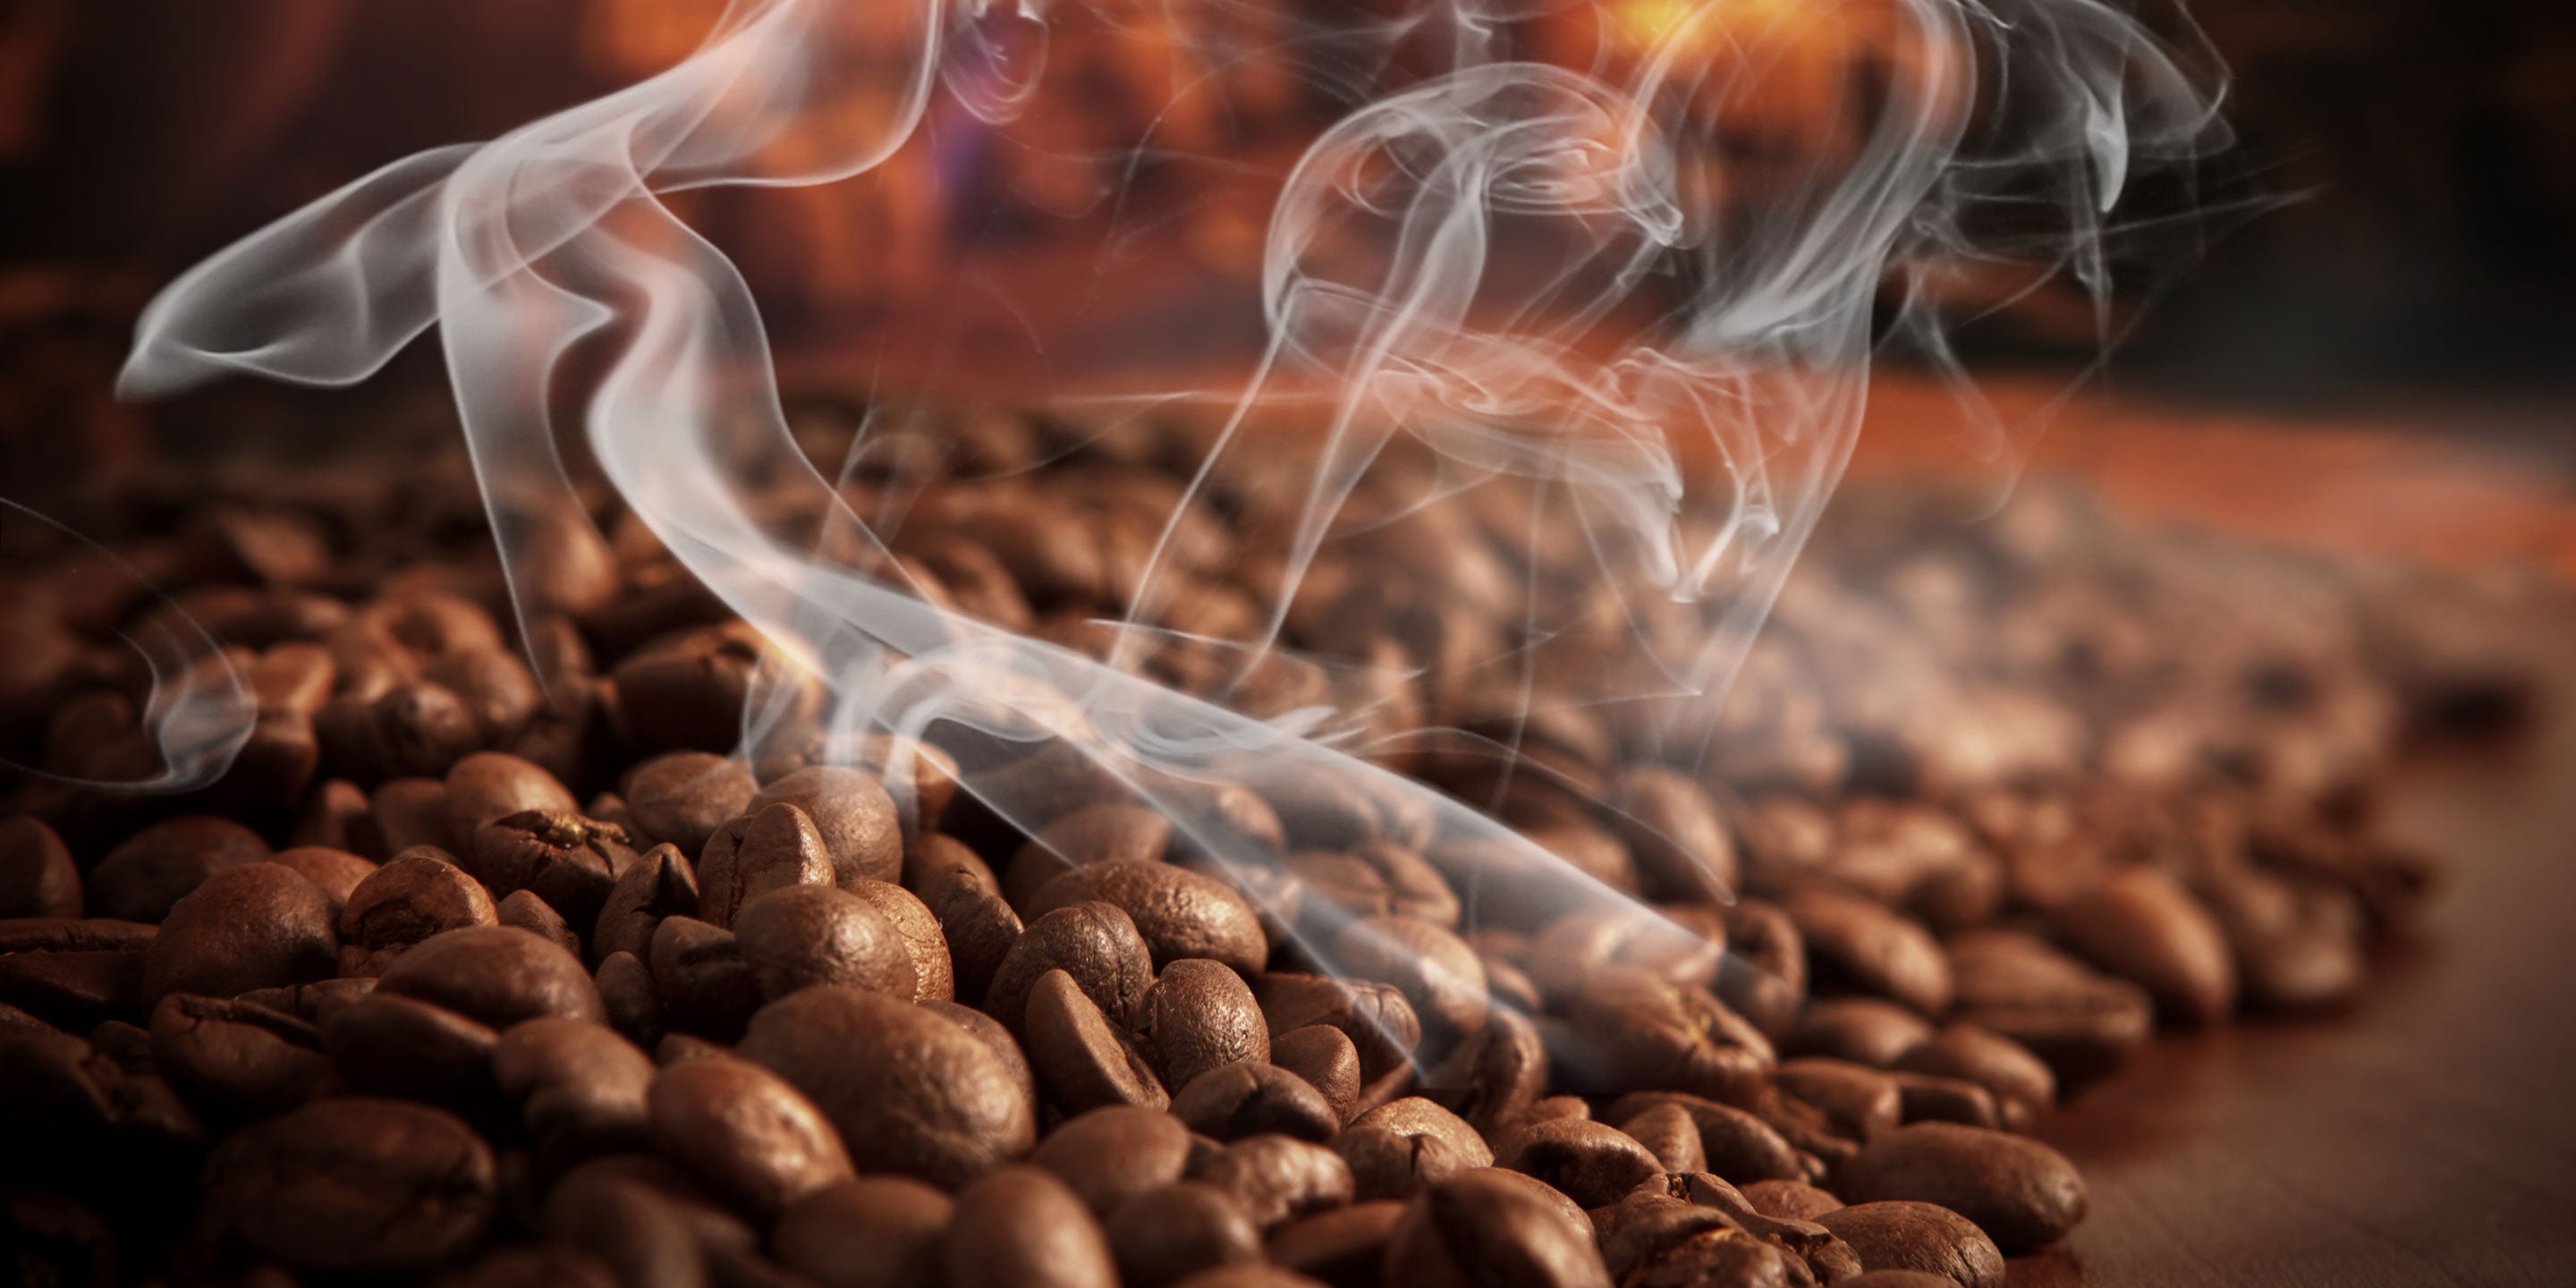 Coffee Craft: Roasting the Beans